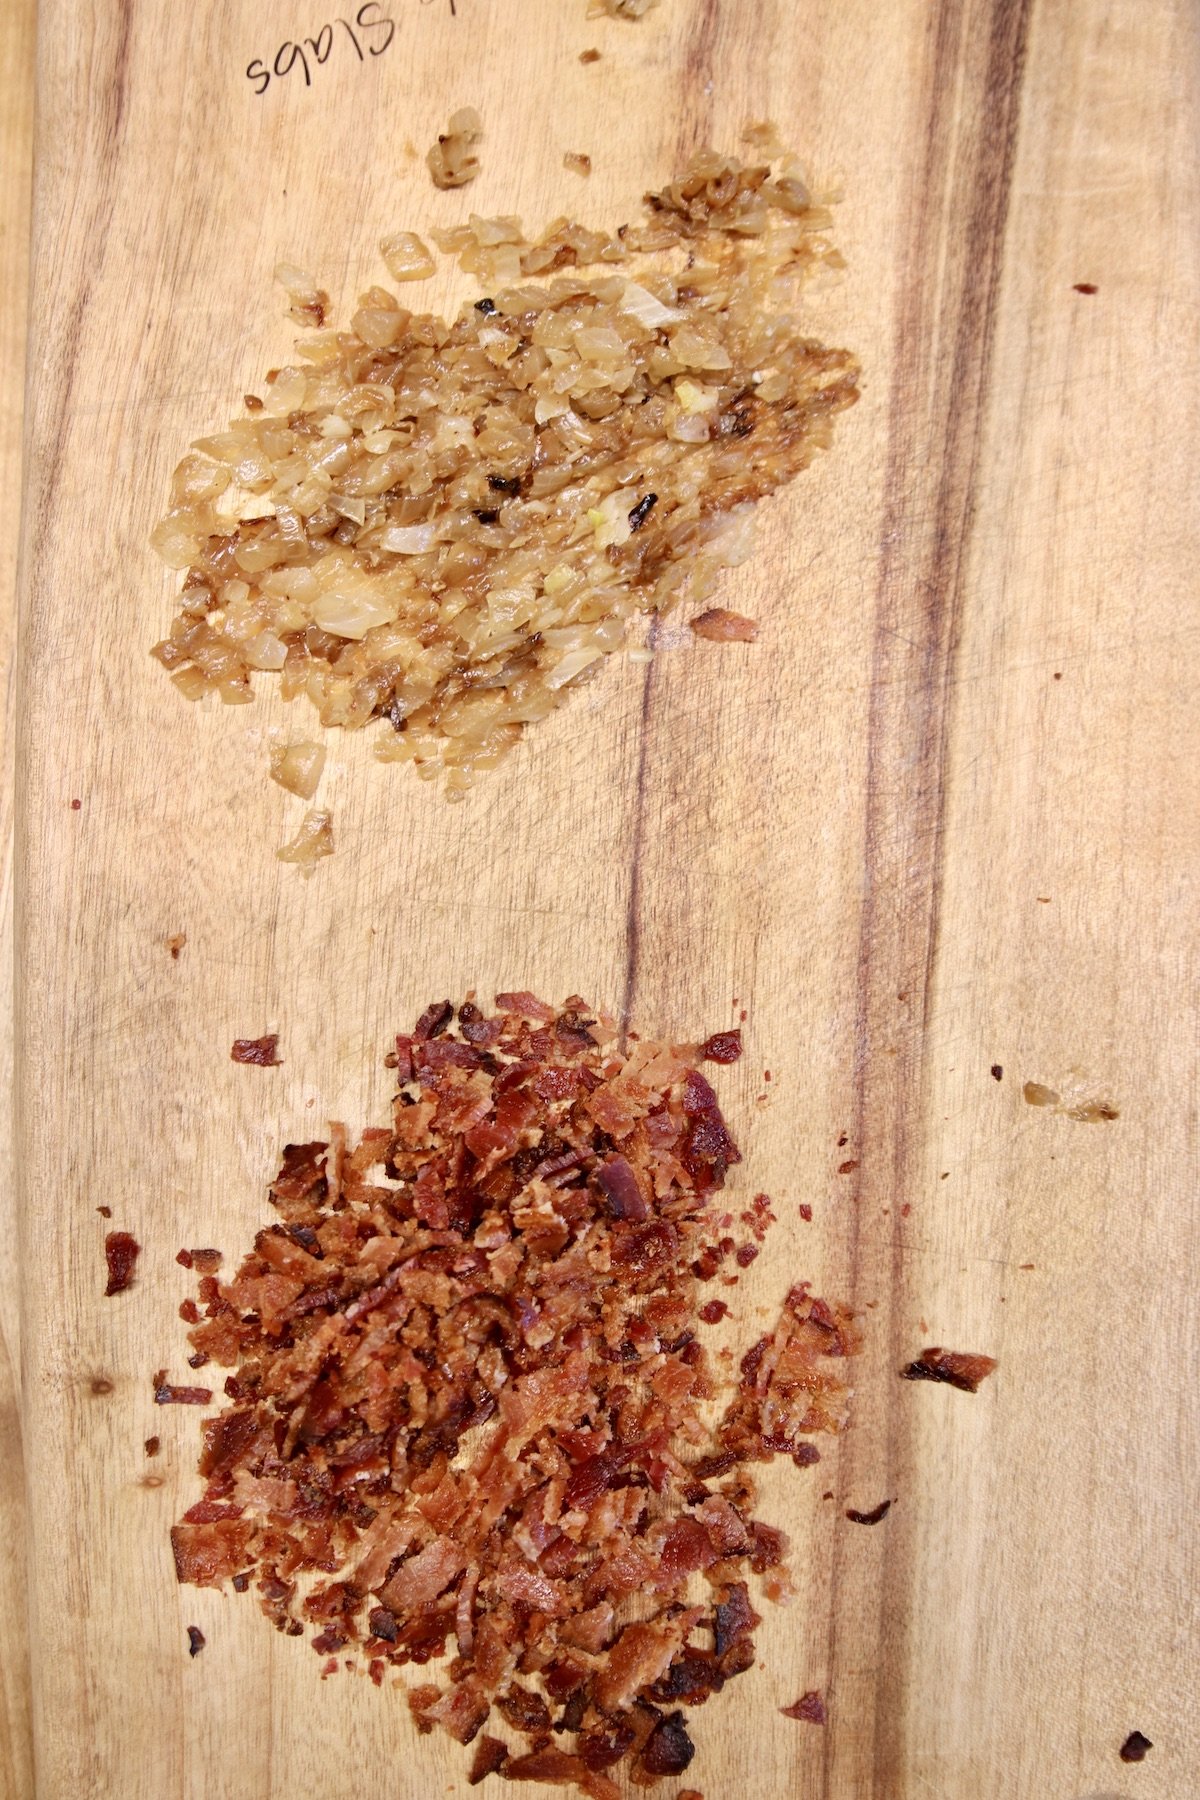 minced caramelized onions and chopped bacon on a cutting board